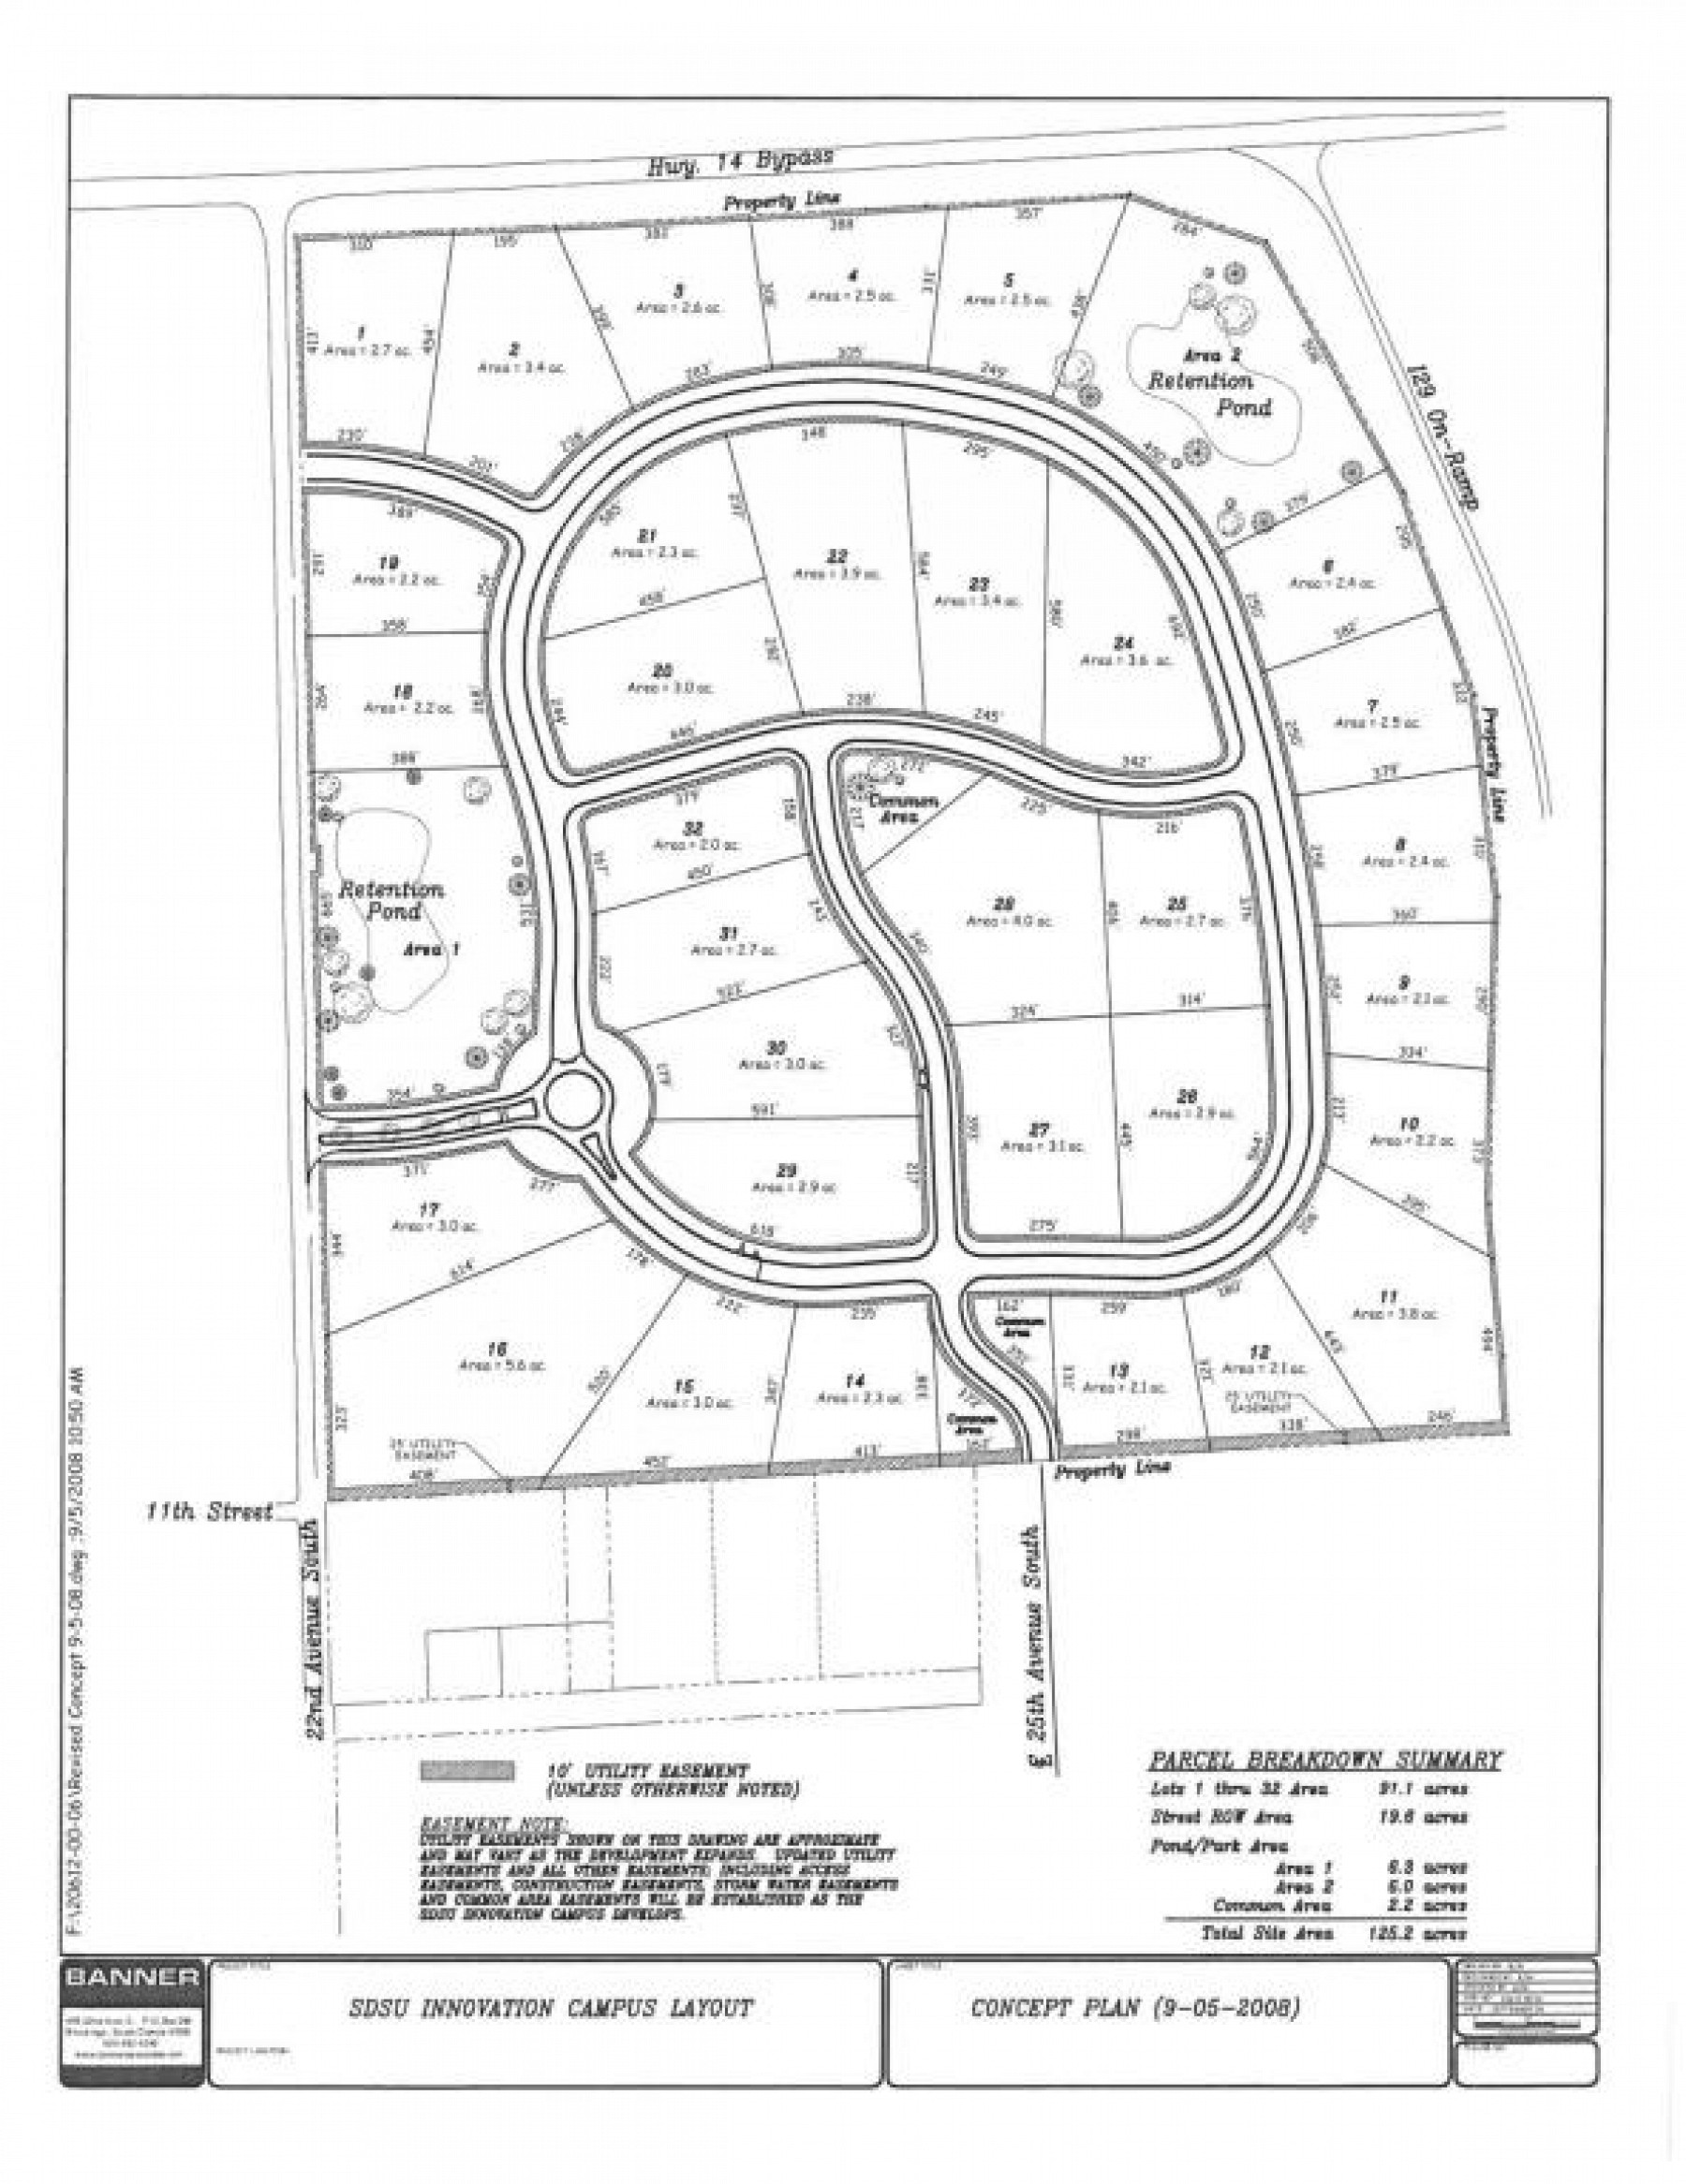 Lot 31 Innovation Campus, Brookings, SD 57006